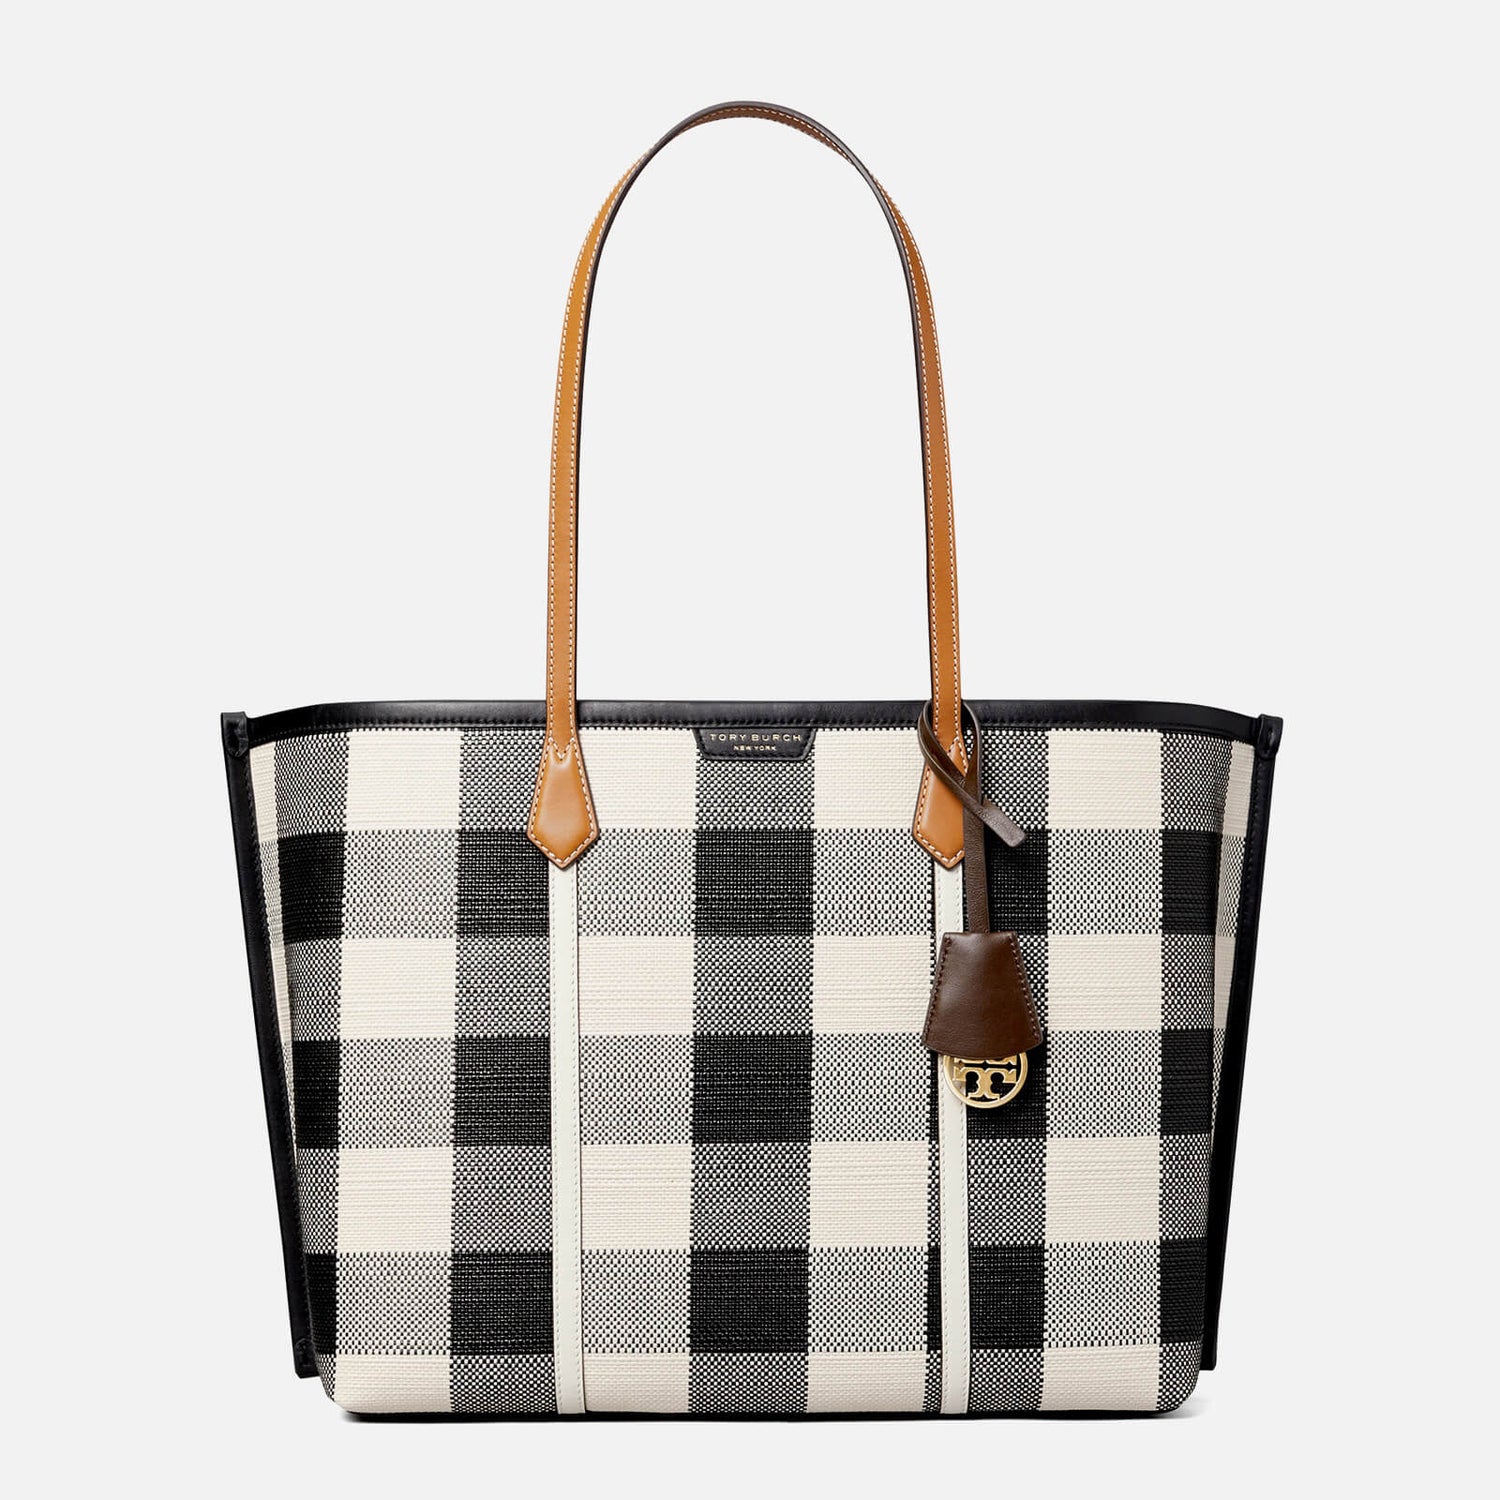 Tory Burch Women's Perry Gingham Compartment Tote Bag - Black/Ivory